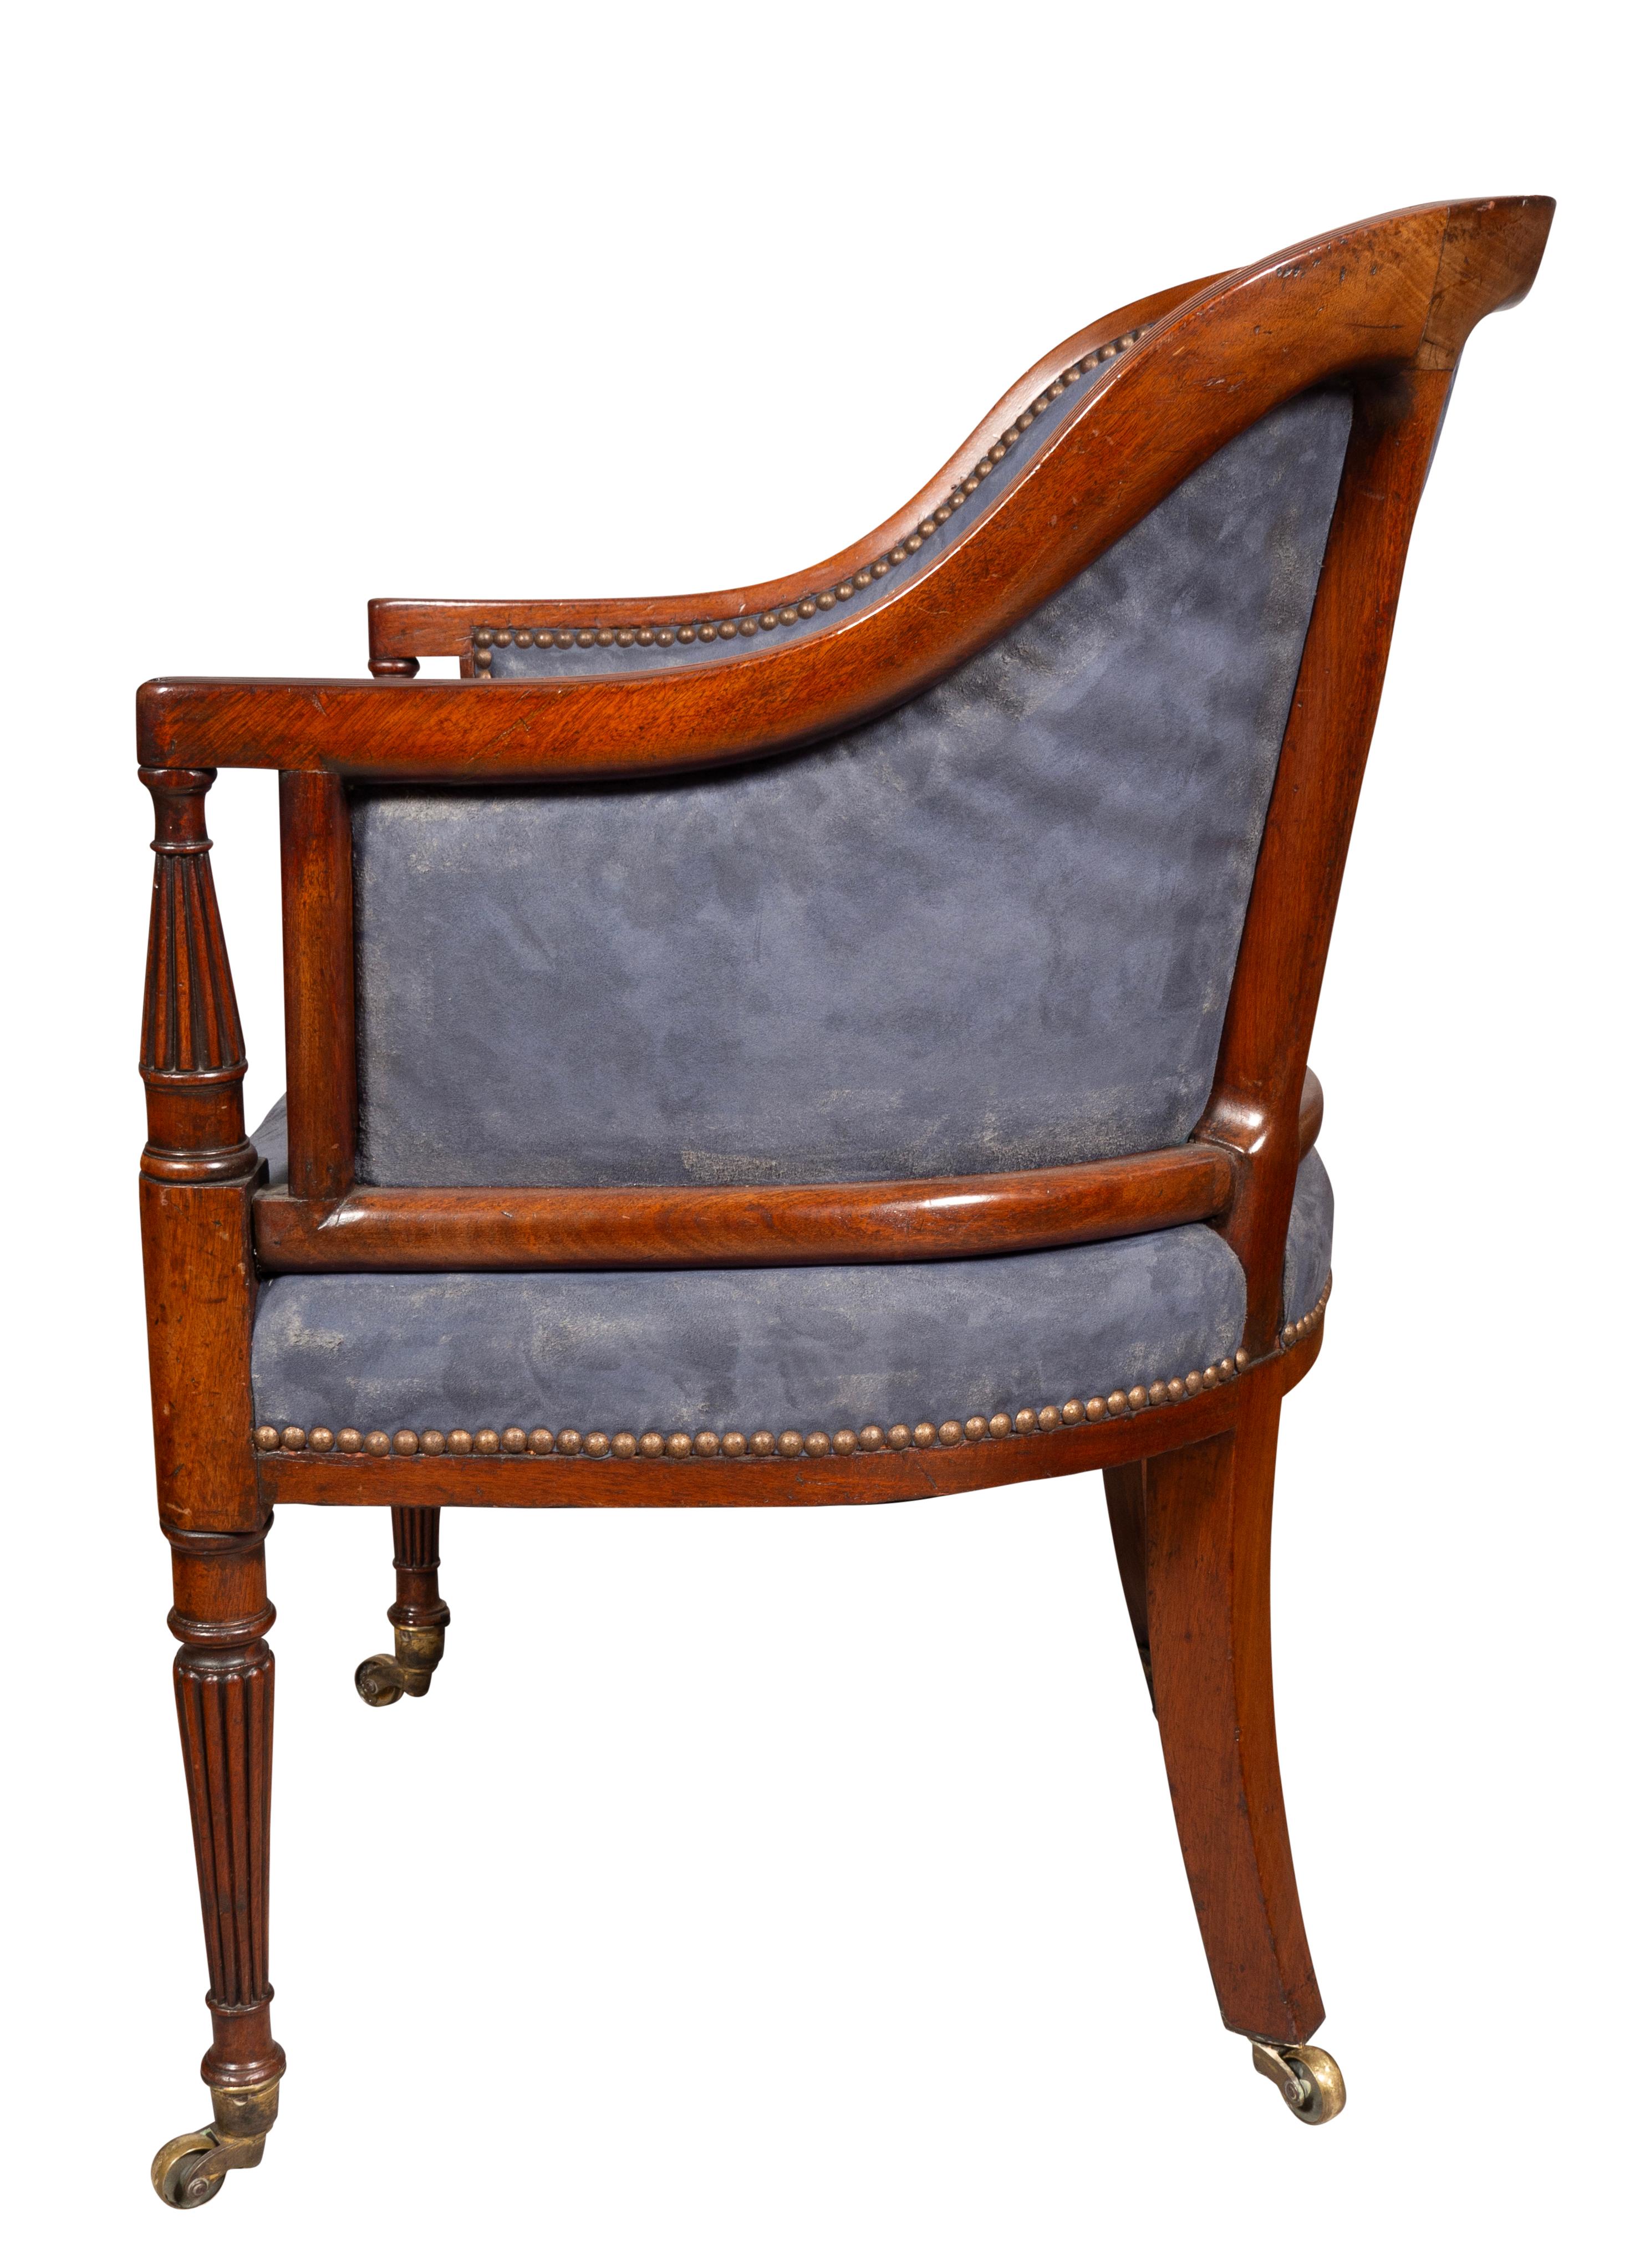 Early 19th Century Regency Mahogany Desk Chair For Sale